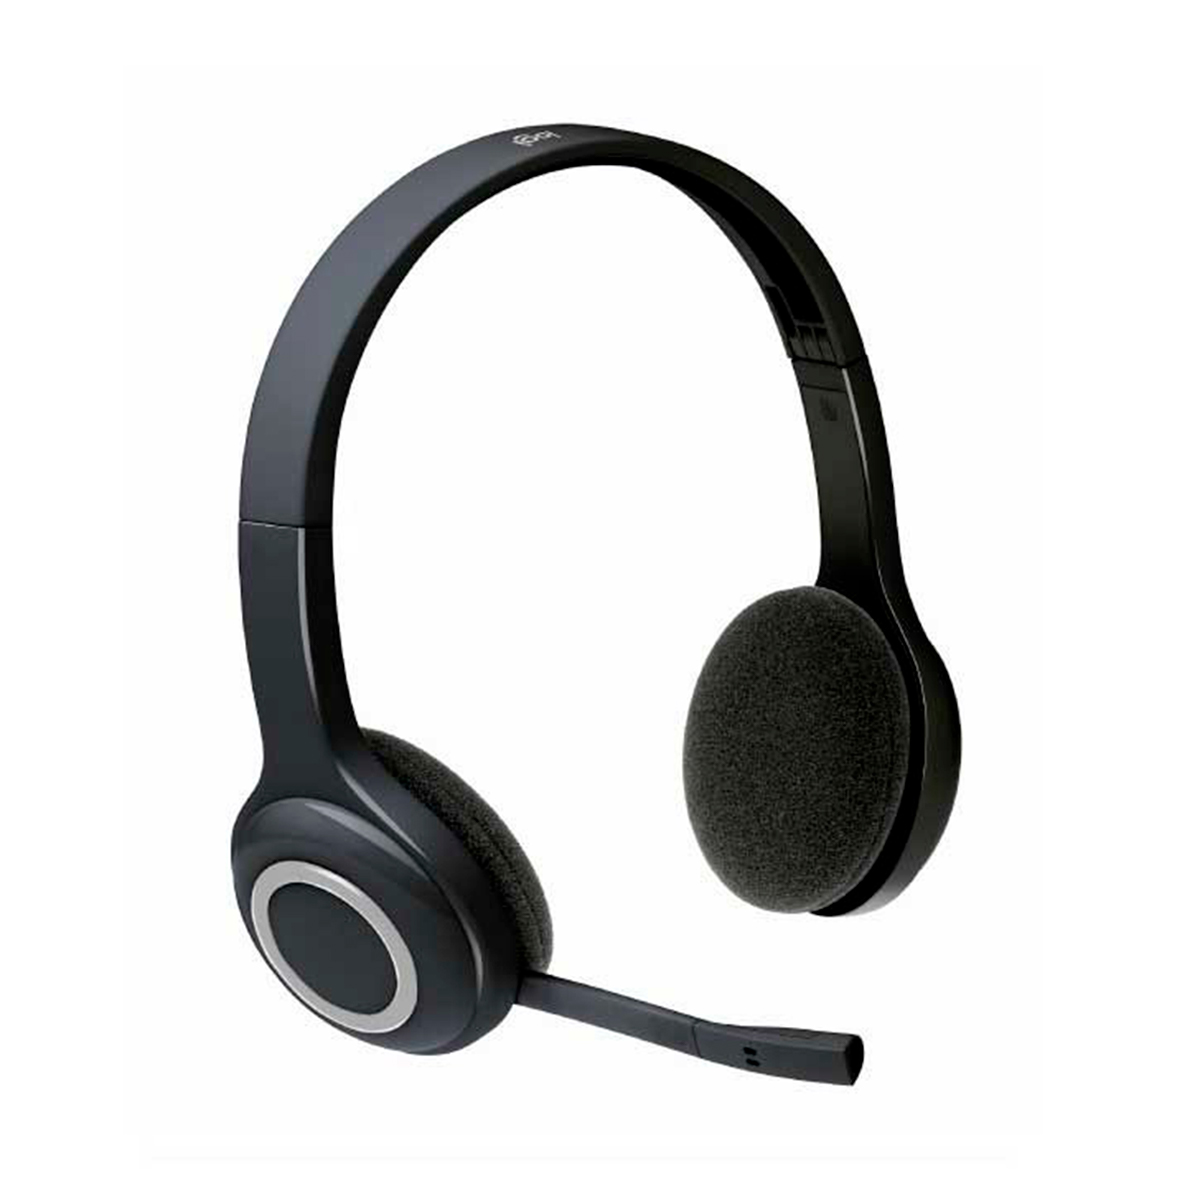 https://mymsuministros.com/wp-content/uploads/2021/03/Auriculares-Inalambricos-Logitech-Over-the-head-H600-1.jpg